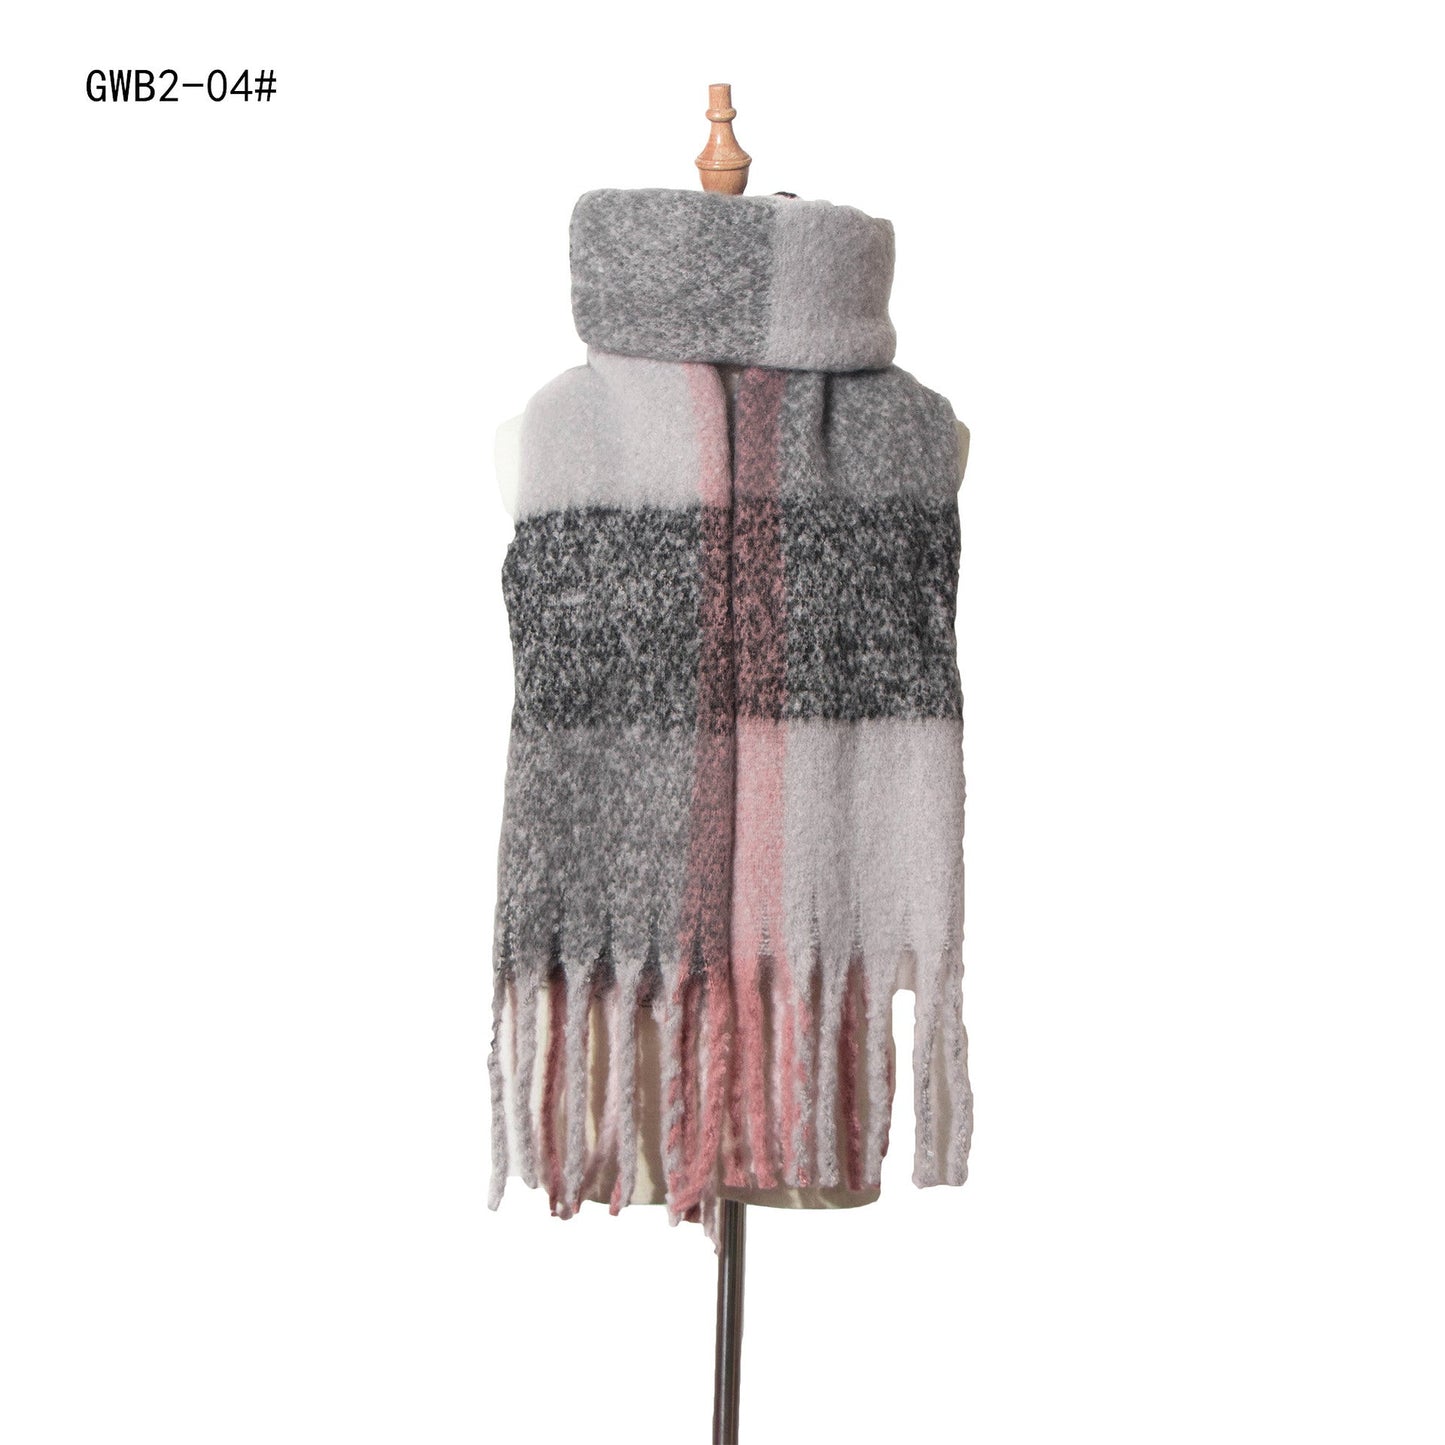 Casual Warm Thick Winter Scarves-Scarves & Shawls-GWB2-04-190-200cm-Free Shipping Leatheretro